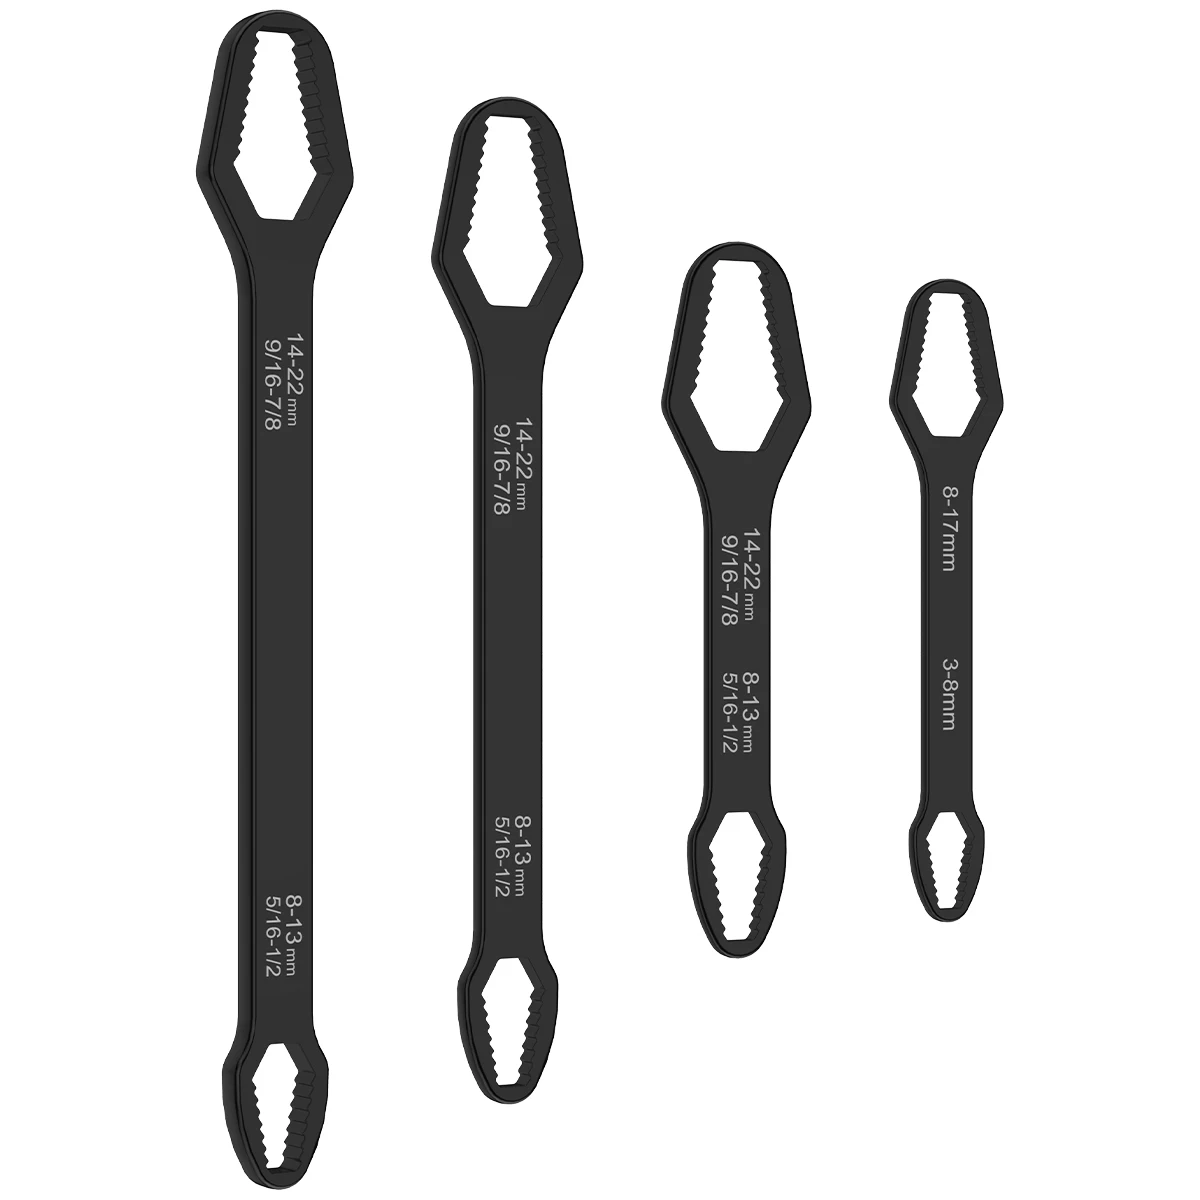 

4Pcs Multifunctional Wrench Set Double-head Torx Wrench 5/16inch-7/8inch and 1/8inch-11/16inch Self-tightening Spanner Hand